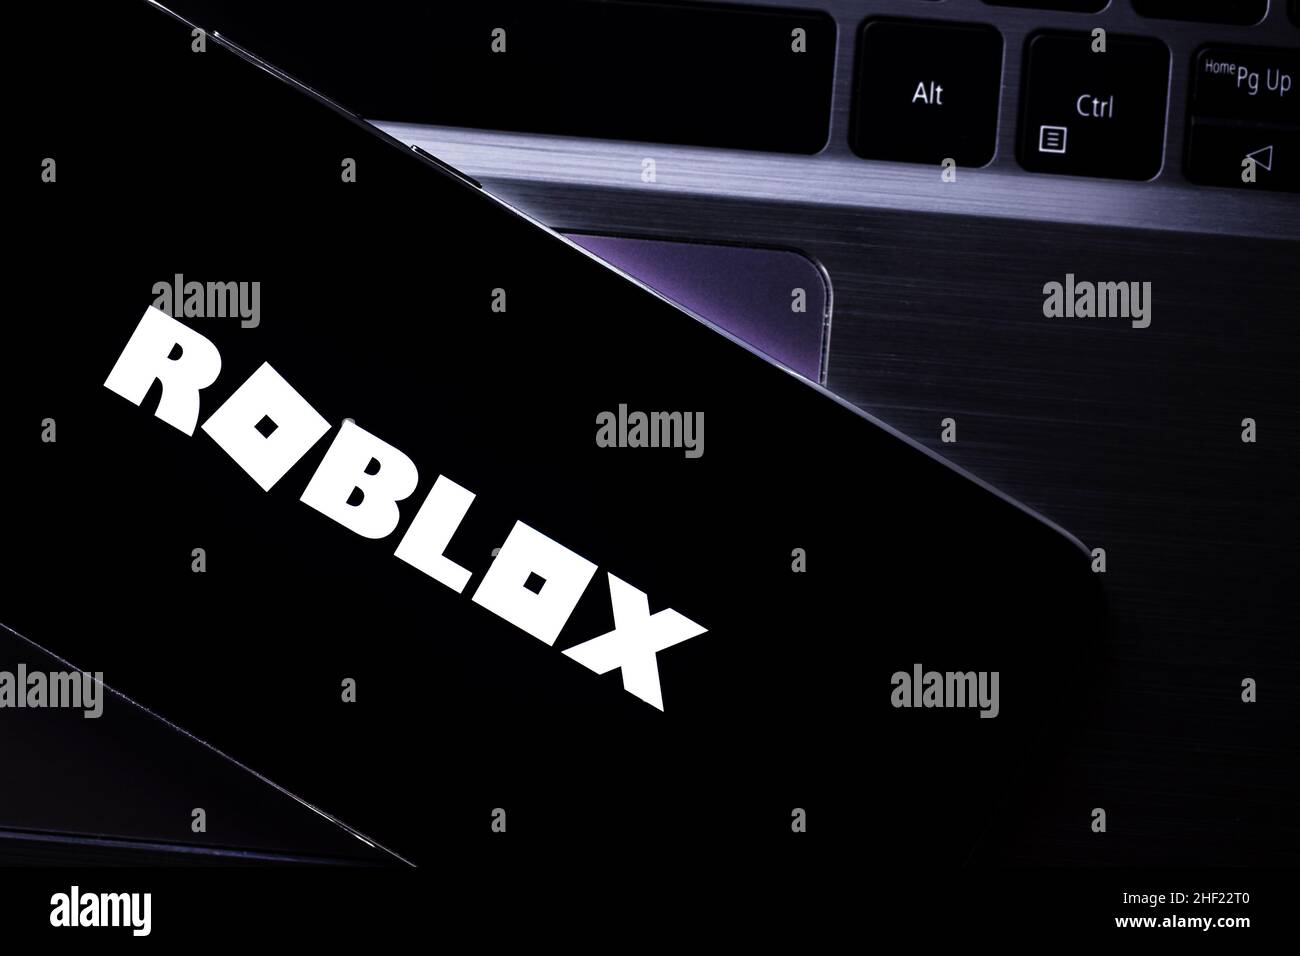 Roblox is an Online Game Platform and Game Creation System. it Allows Users  To Program Games and Play Games Created by Other Users Editorial Stock  Image - Image of background, cellphone: 214559929